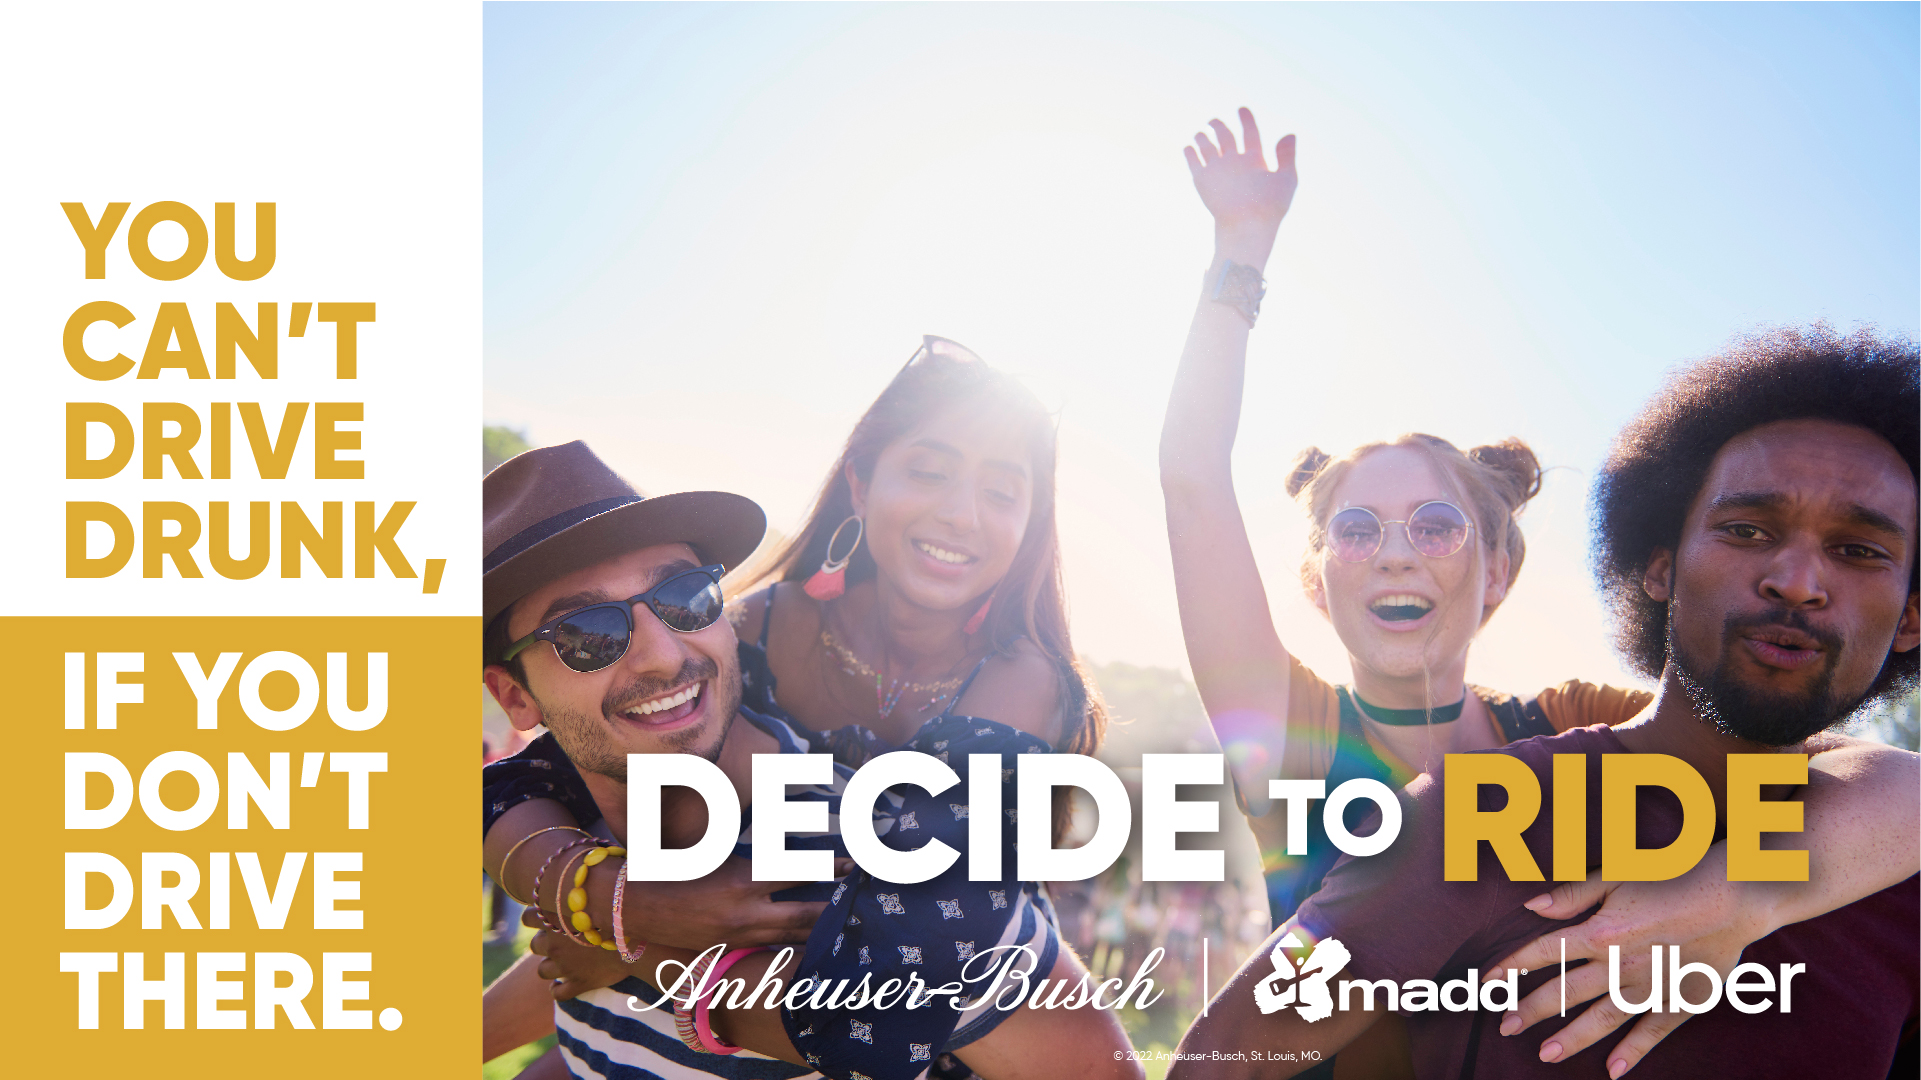 Anheuser-Busch, MADD and Uber Partner to Help Prevent Drunk Driving in Washington, D.C. this Summer Through the Decide to Ride Campaign